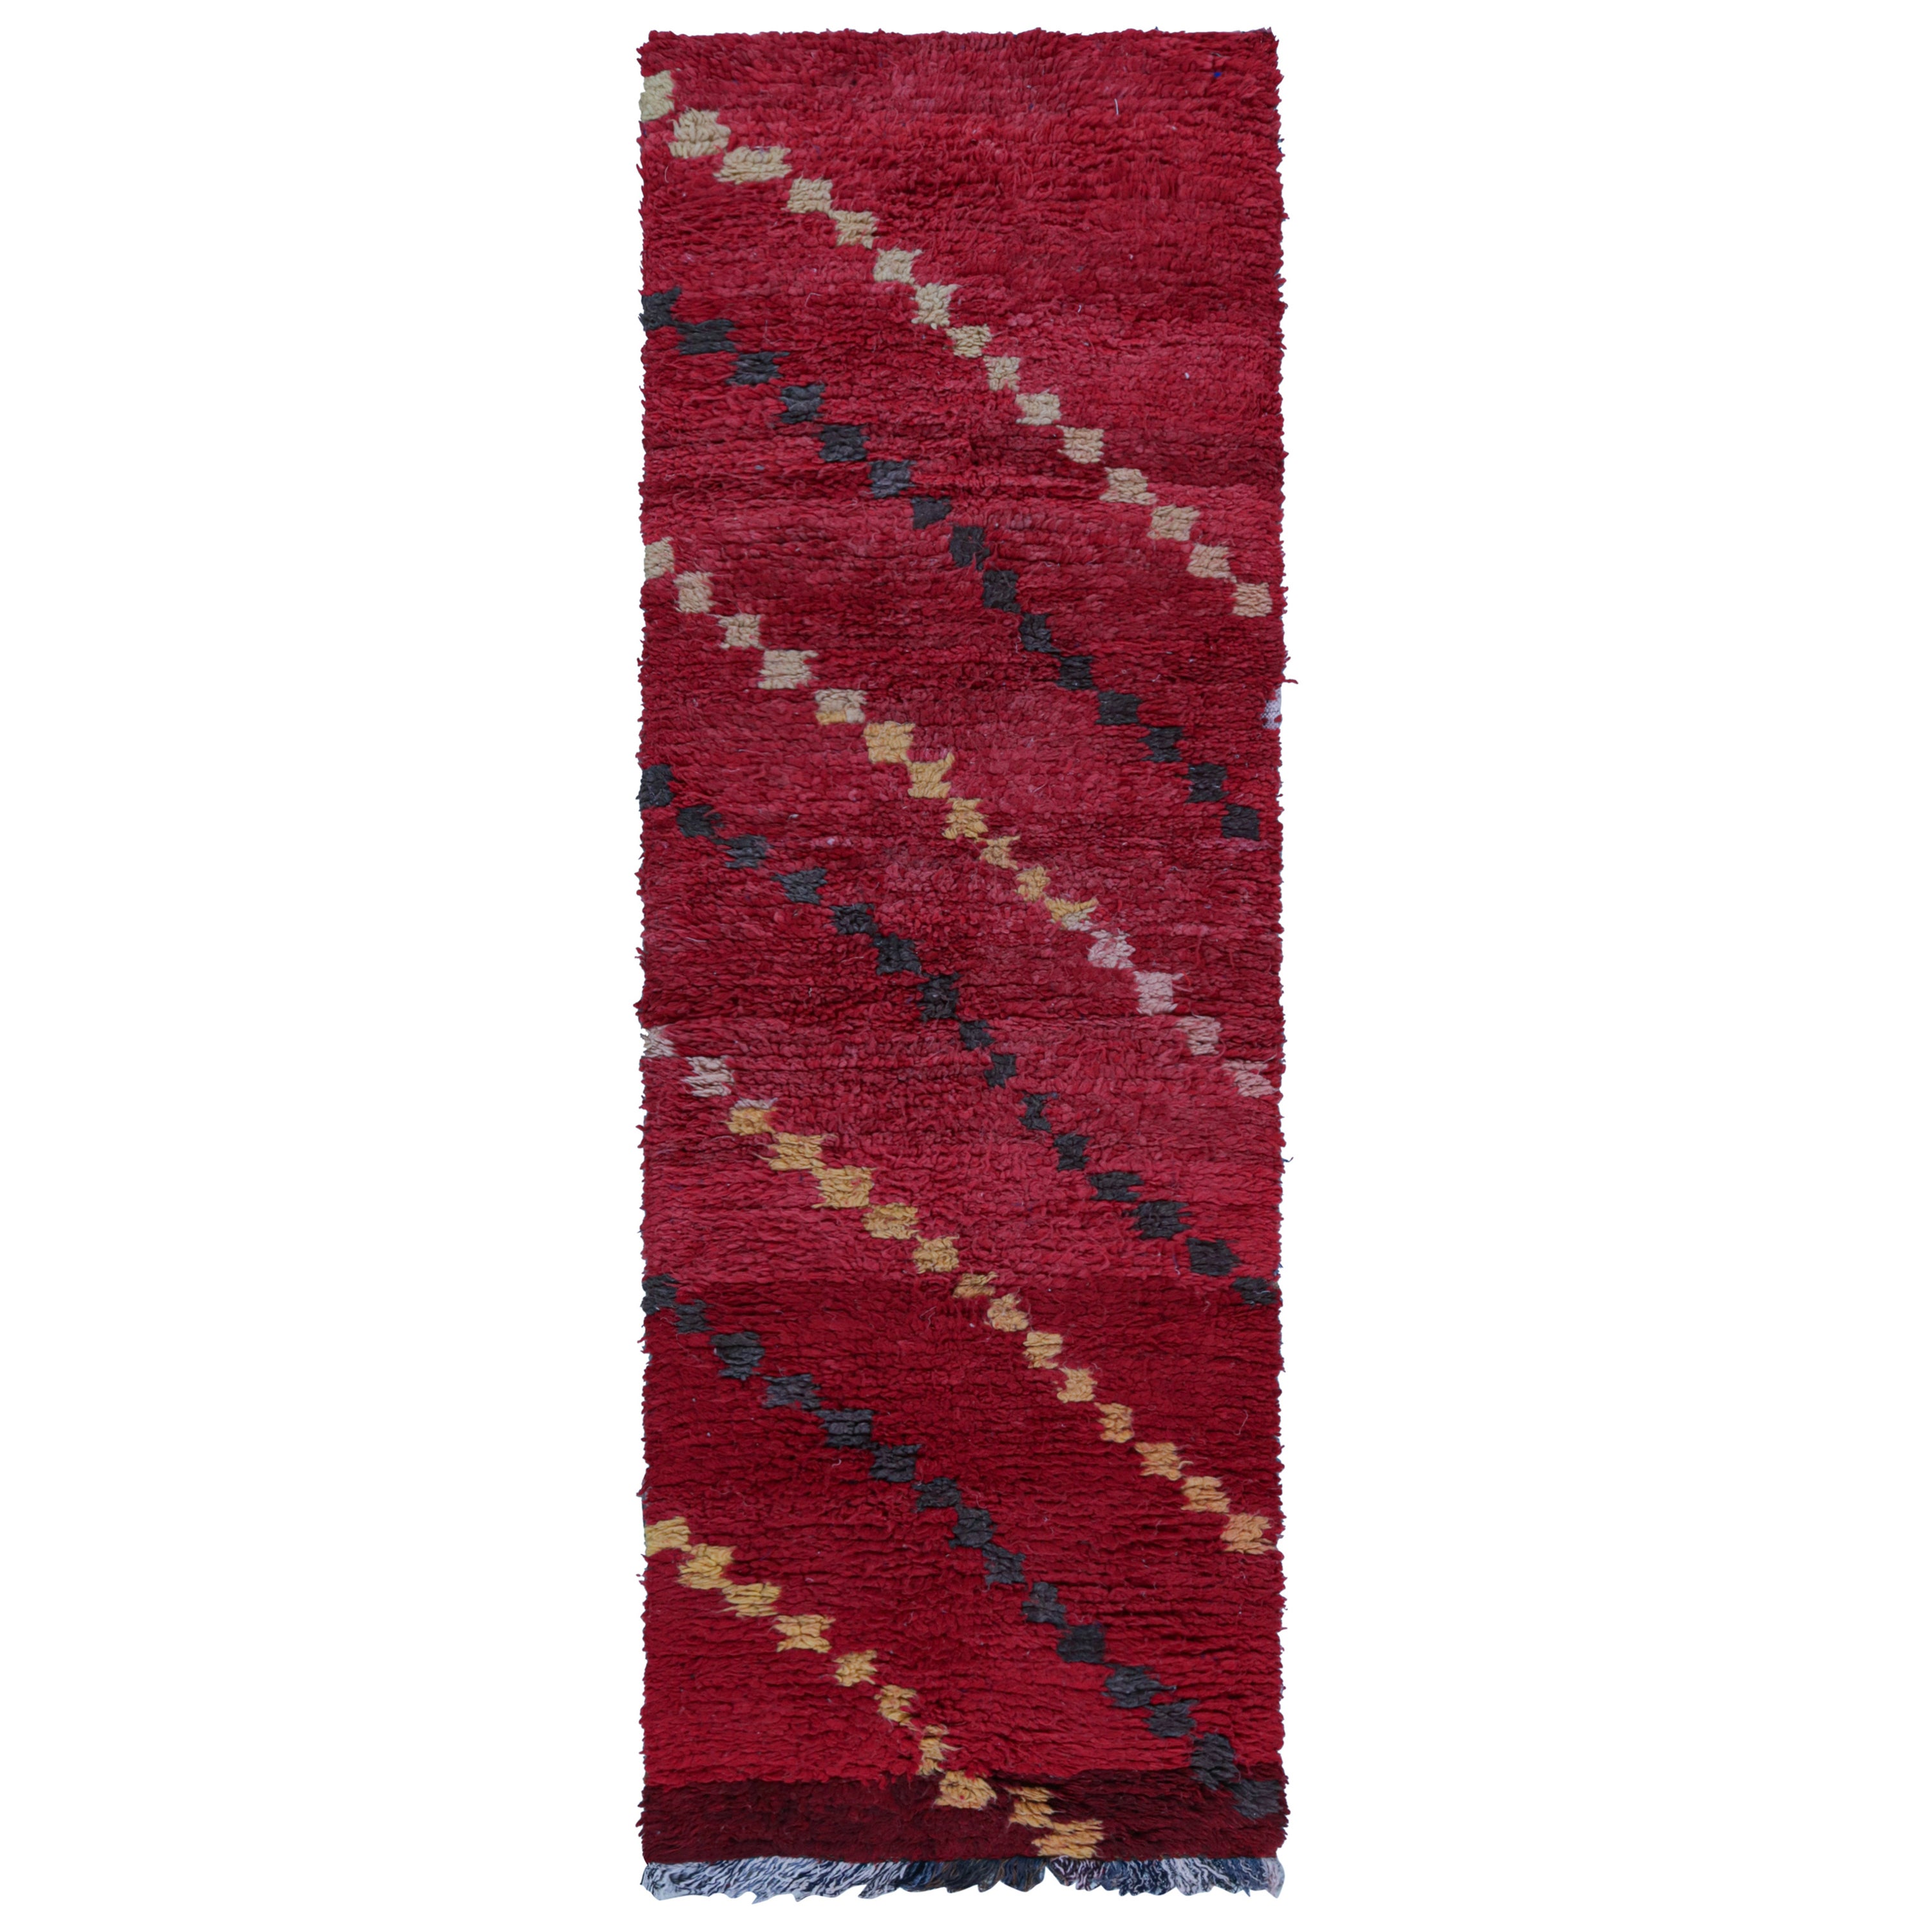 1950s Azilal Moroccan runner rug in Red with Geometric Patterns by Rug & Kilim For Sale